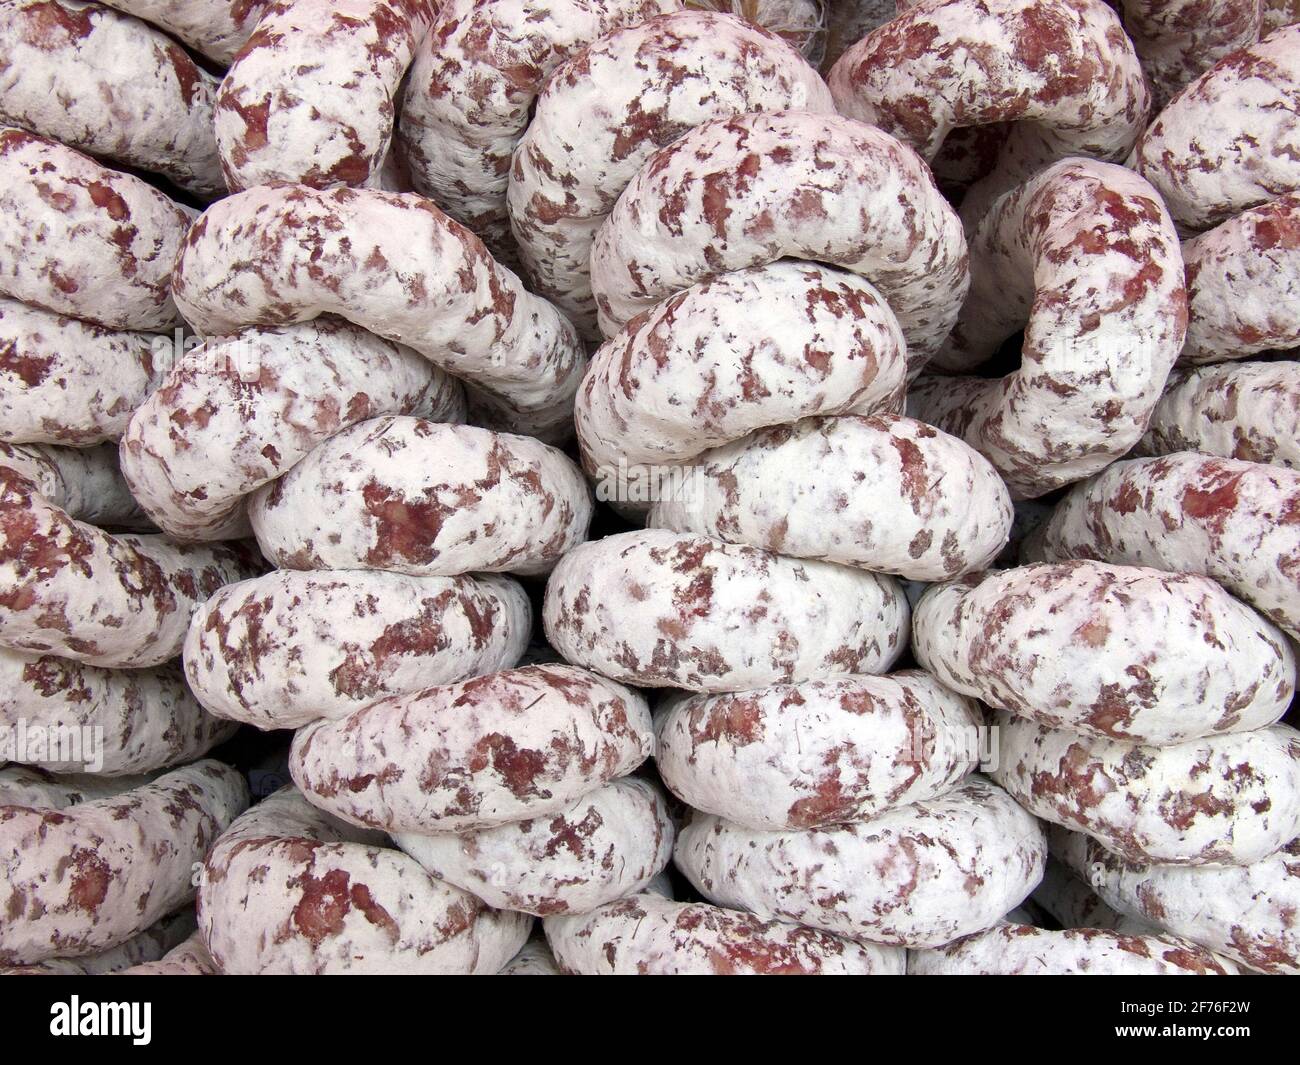 Pile of delicious salami sausages Stock Photo